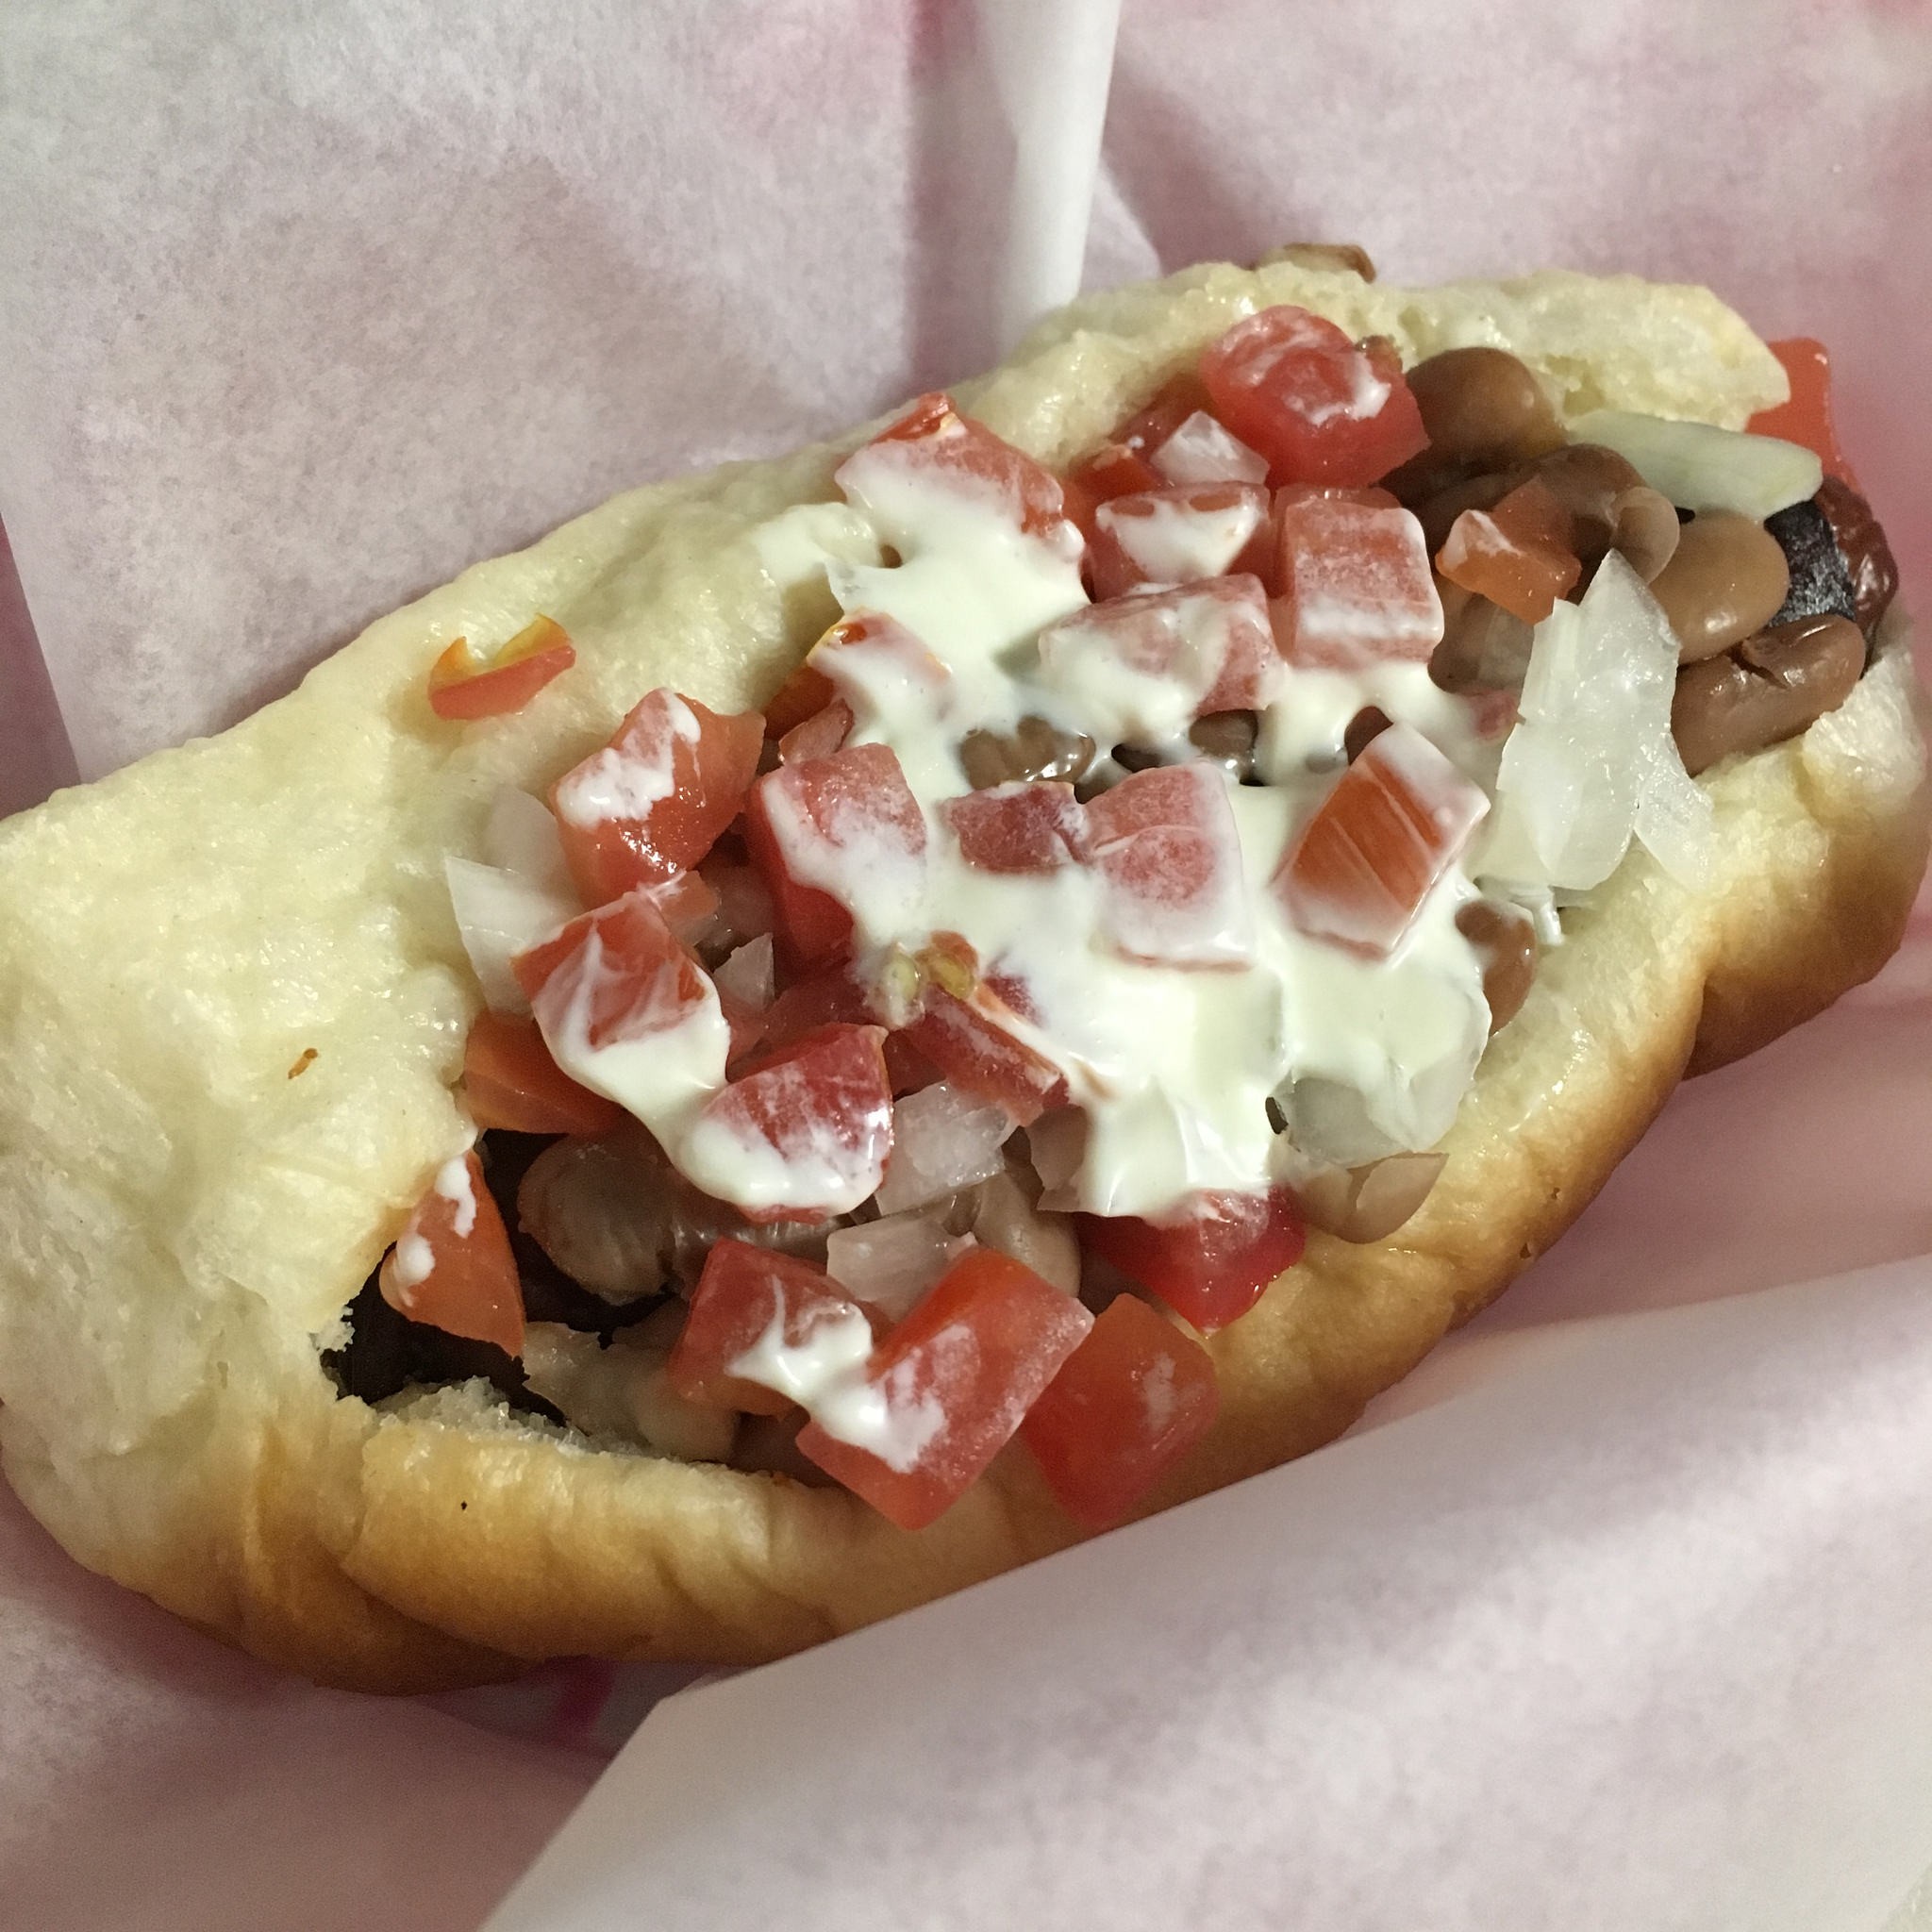 The 10 Best Hot Dog Joints in Arizona!